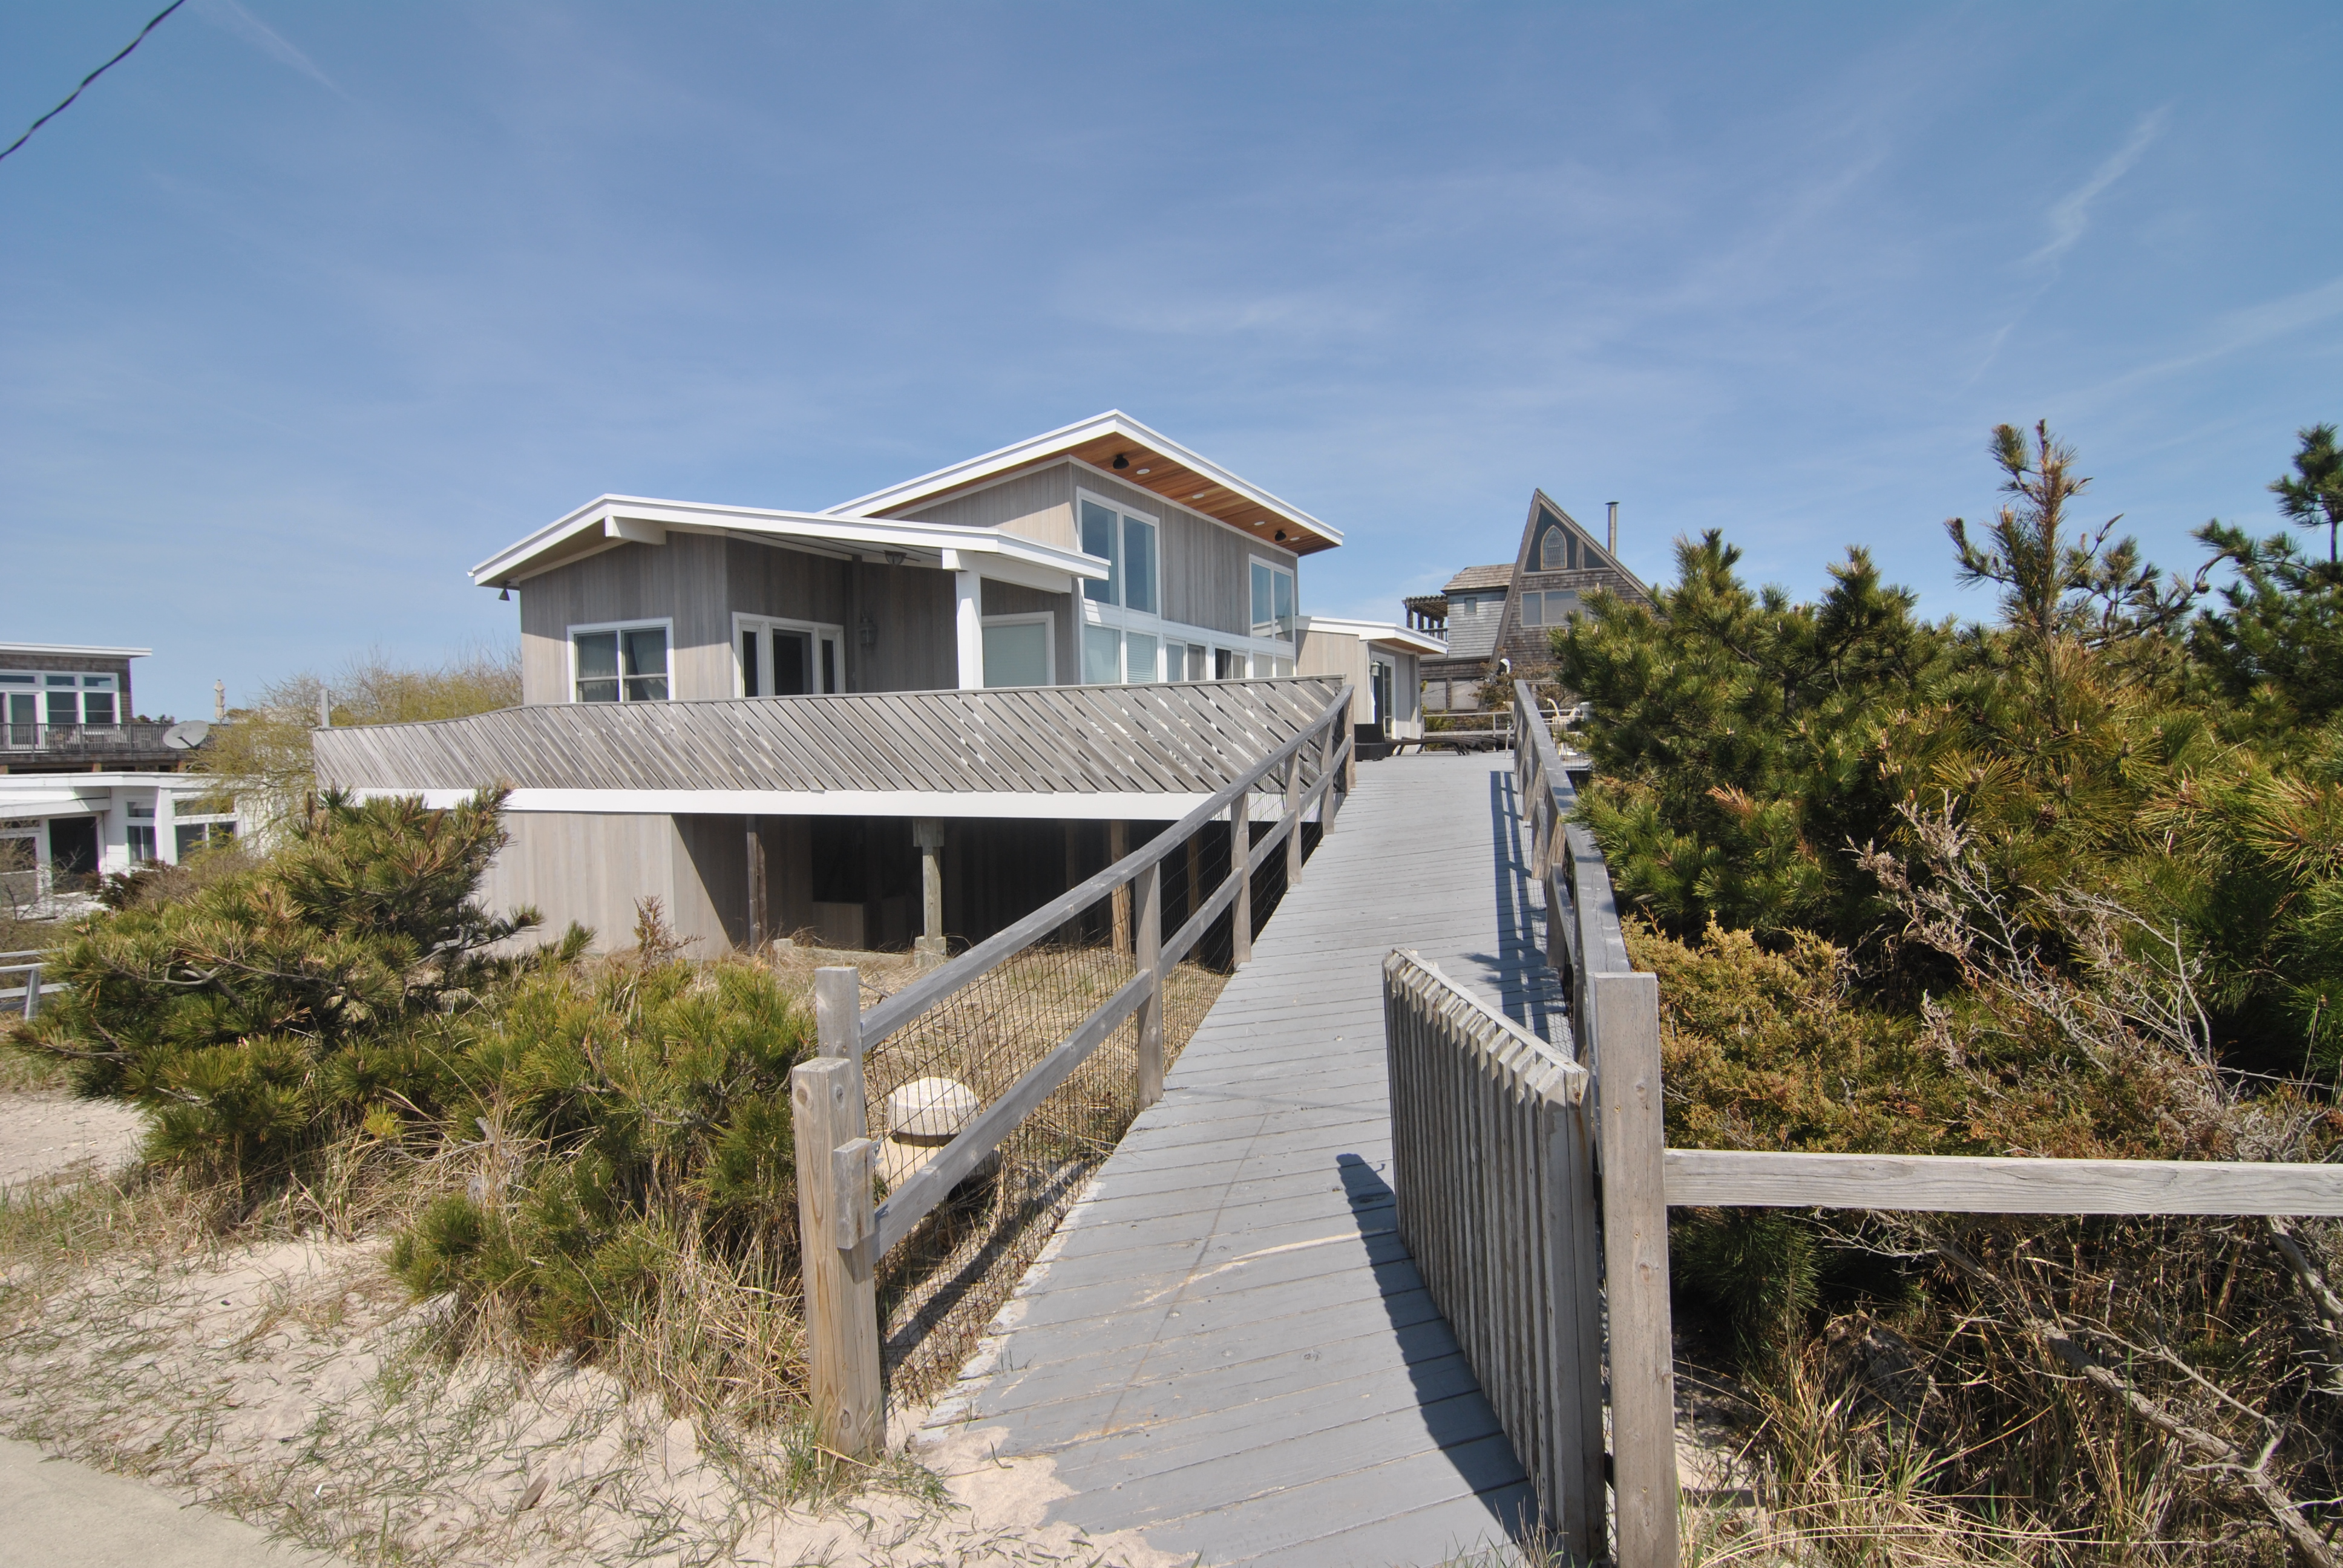 Large 5 bedroom beachfront home. Huge, ocean facing deck. Incredible views. Fully renovated. 3.5 bathrooms. Vacation in style this year. Fabulous Seaview location. 
<br>
